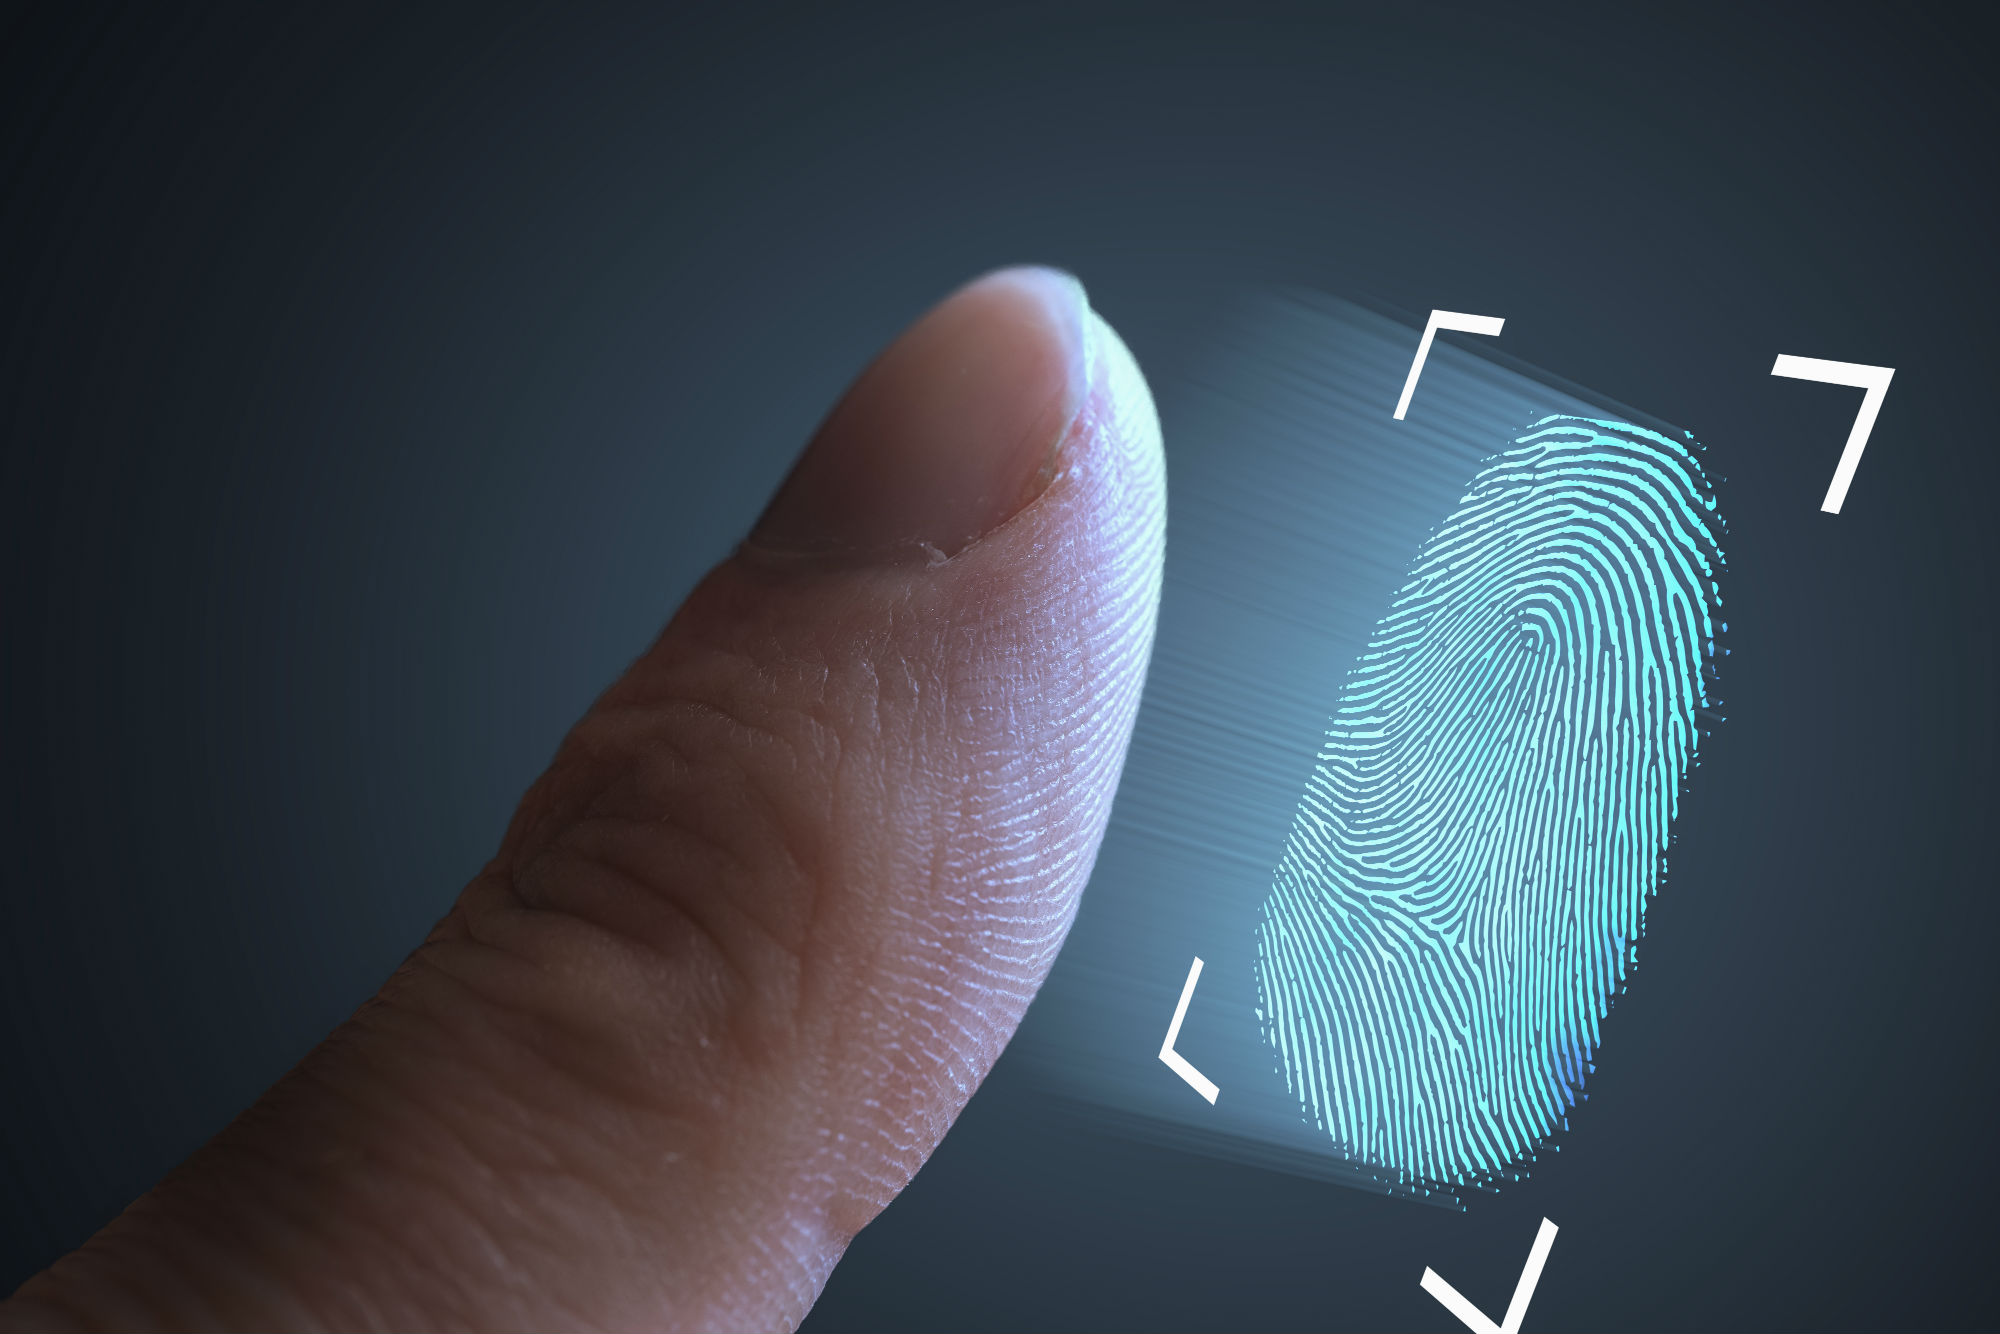 Biometric indicators such as facial recognition and fingerprints are set to replace the password. Image: Shutterstock